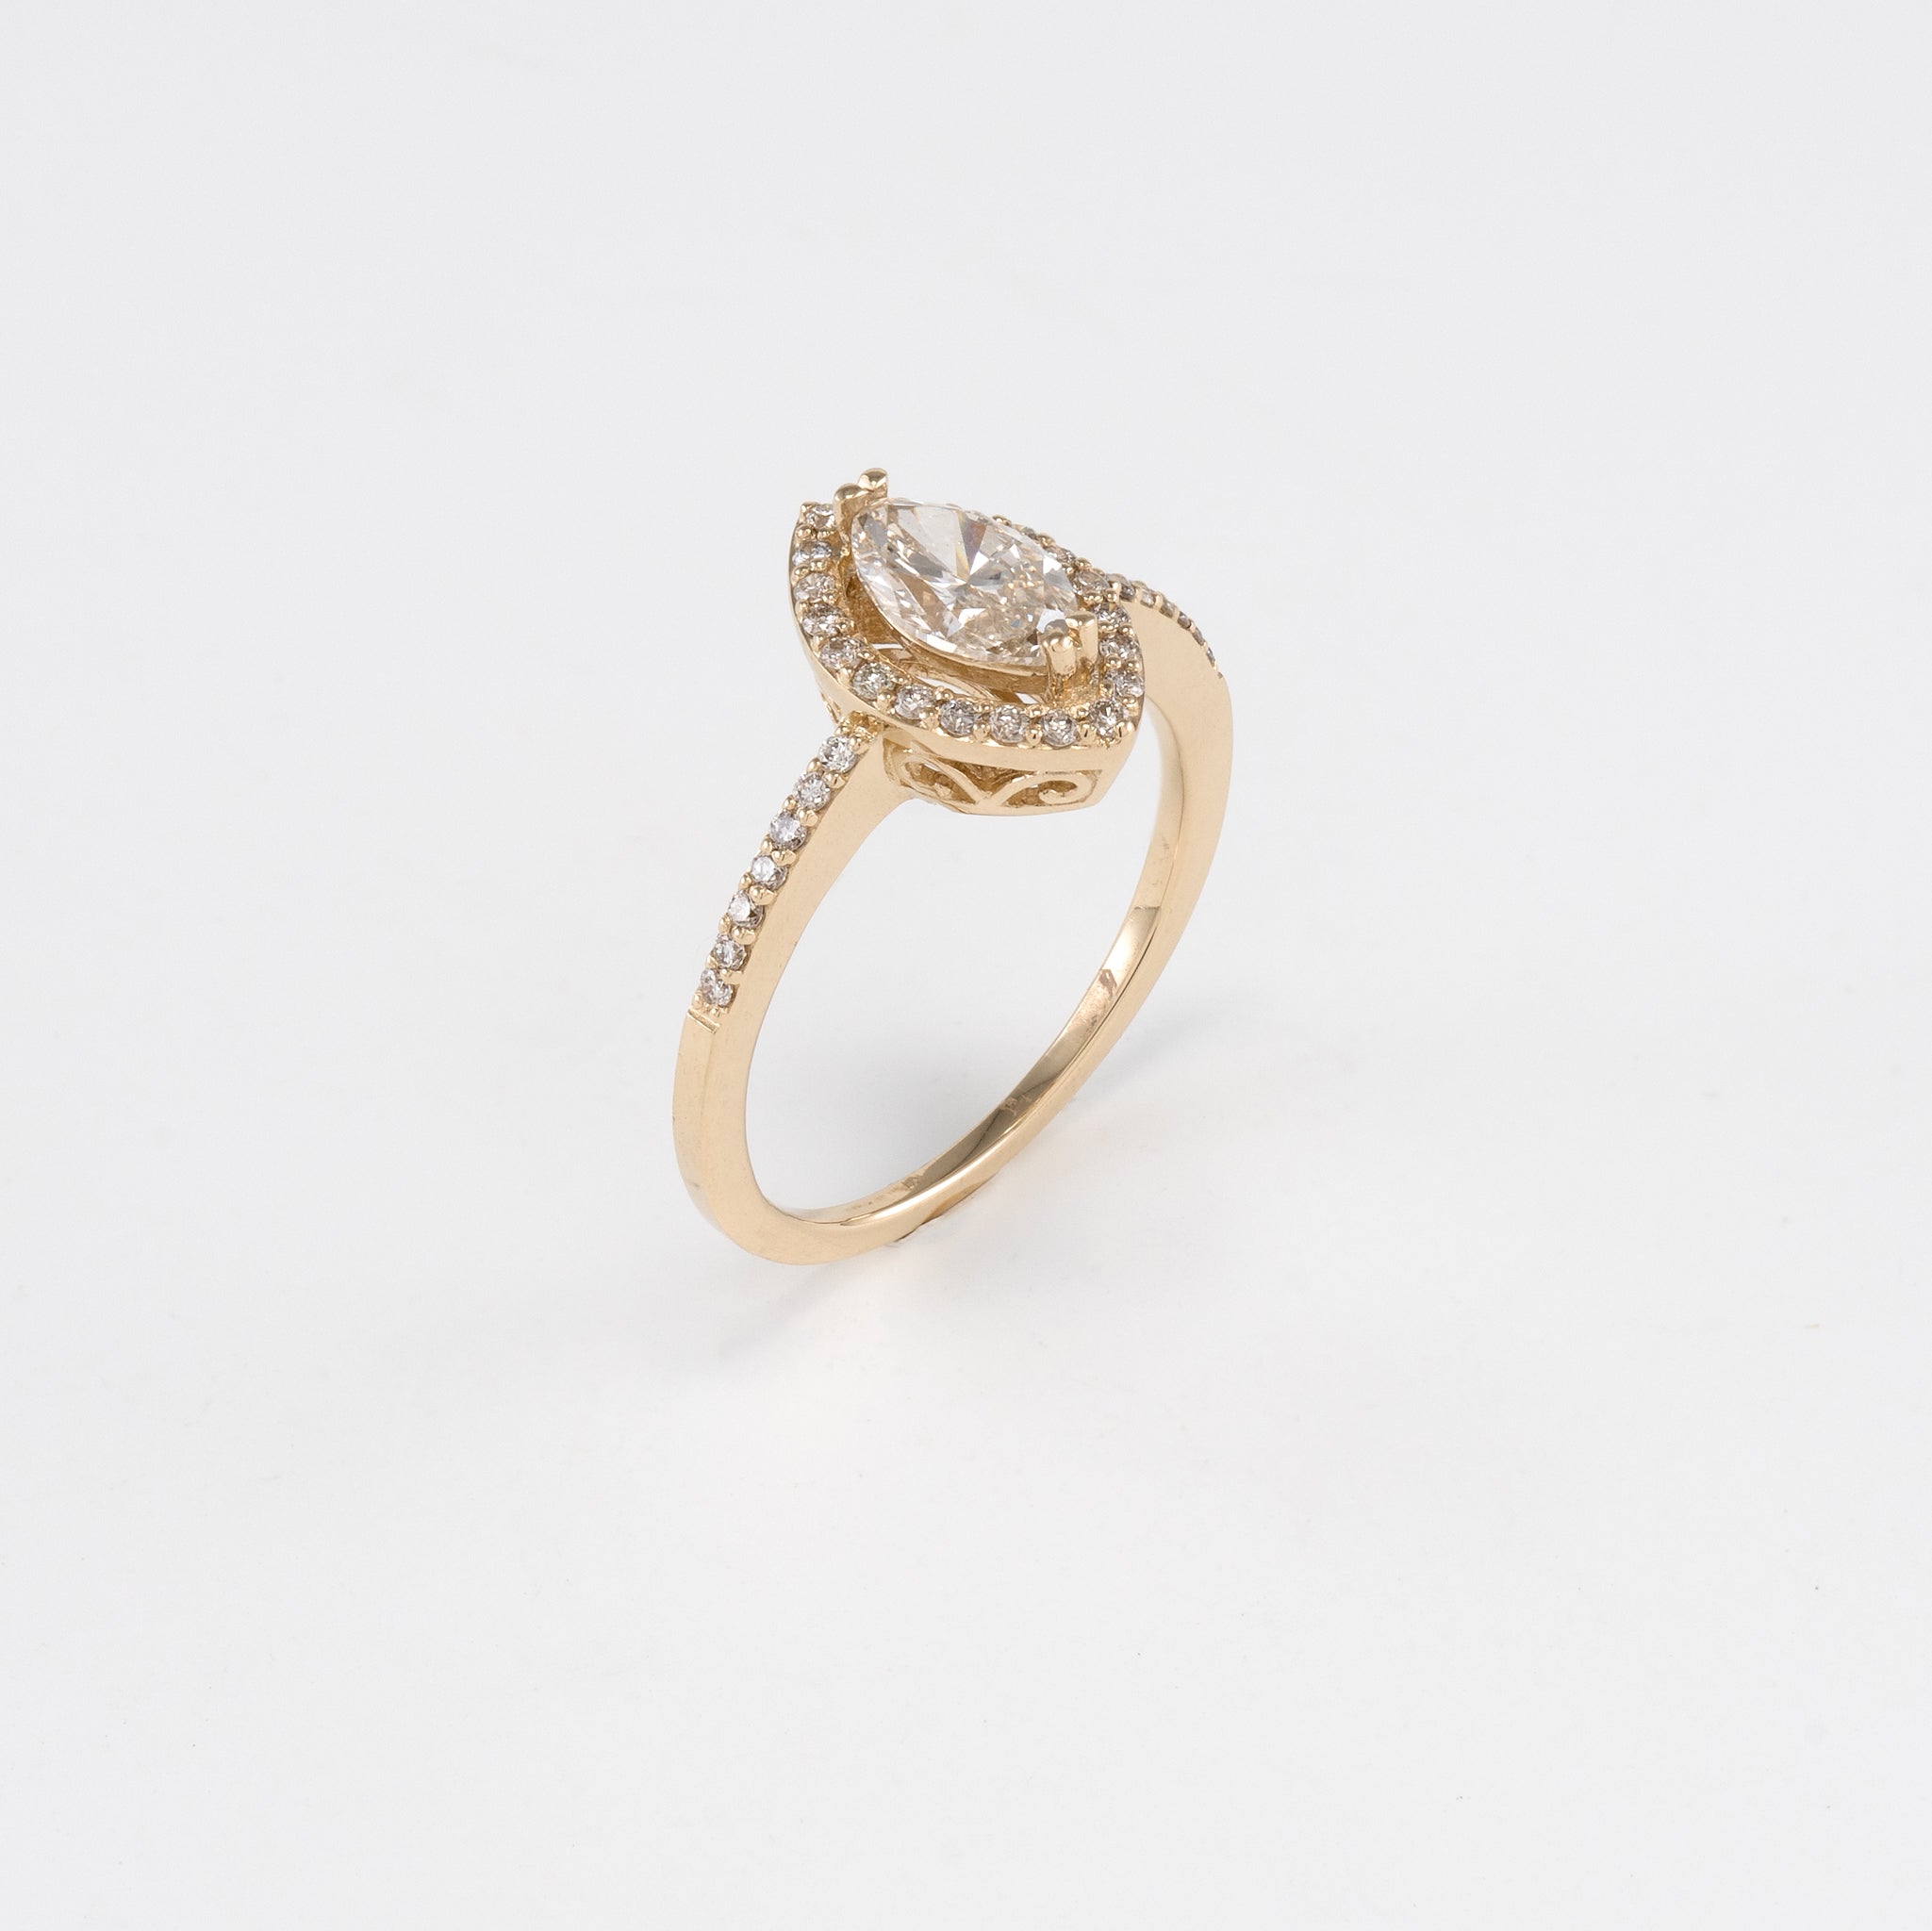 14KT Yellow Gold 0.89CT T/W Diamond Engagement Ring